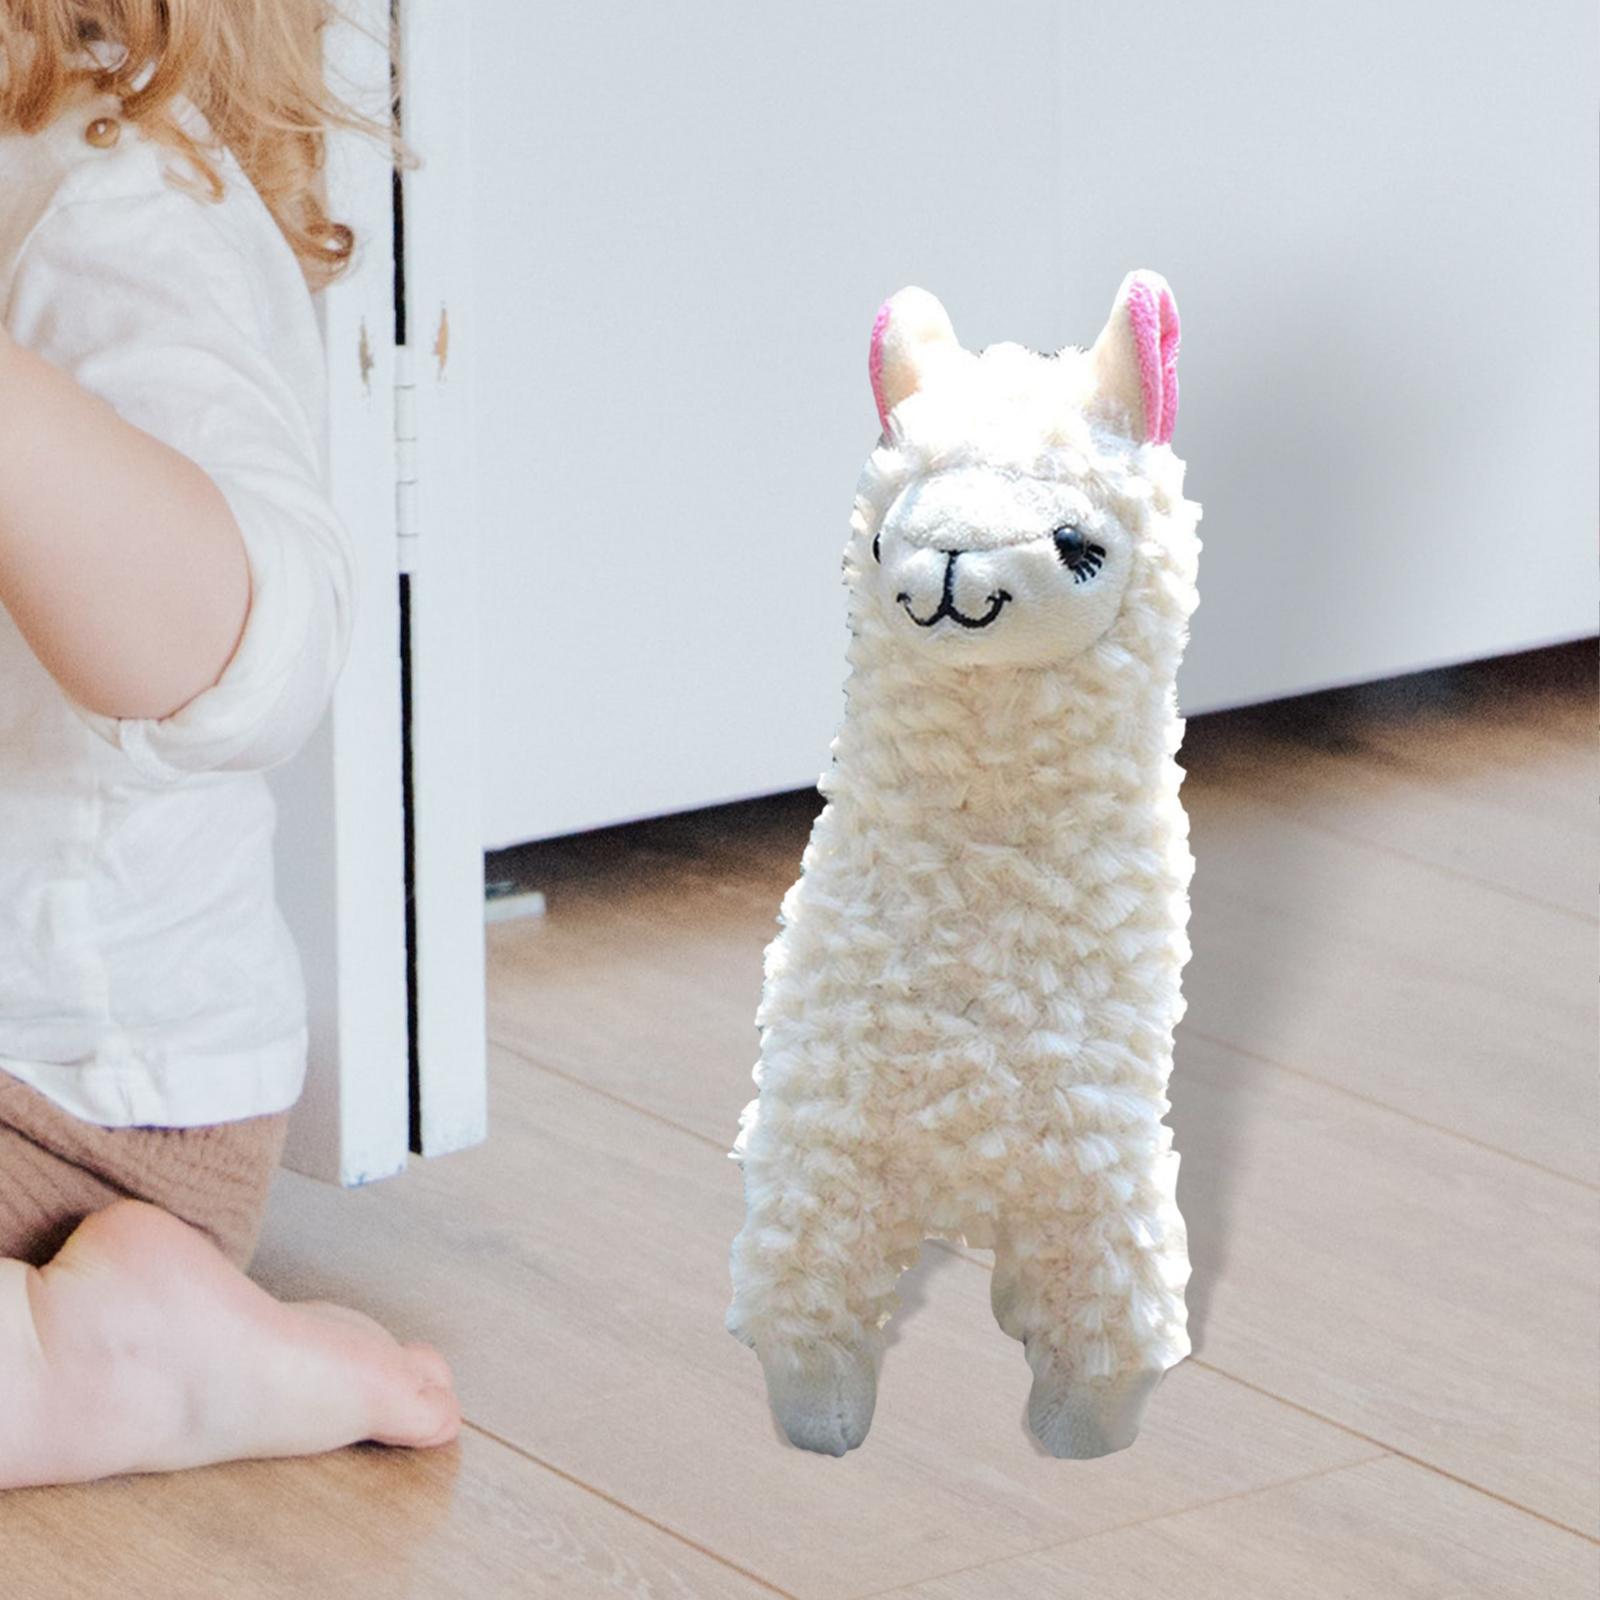 Animal Plush Toys Small Doll Alpaca Soft Ornaments for Kids Girls Boys Gifts Beige